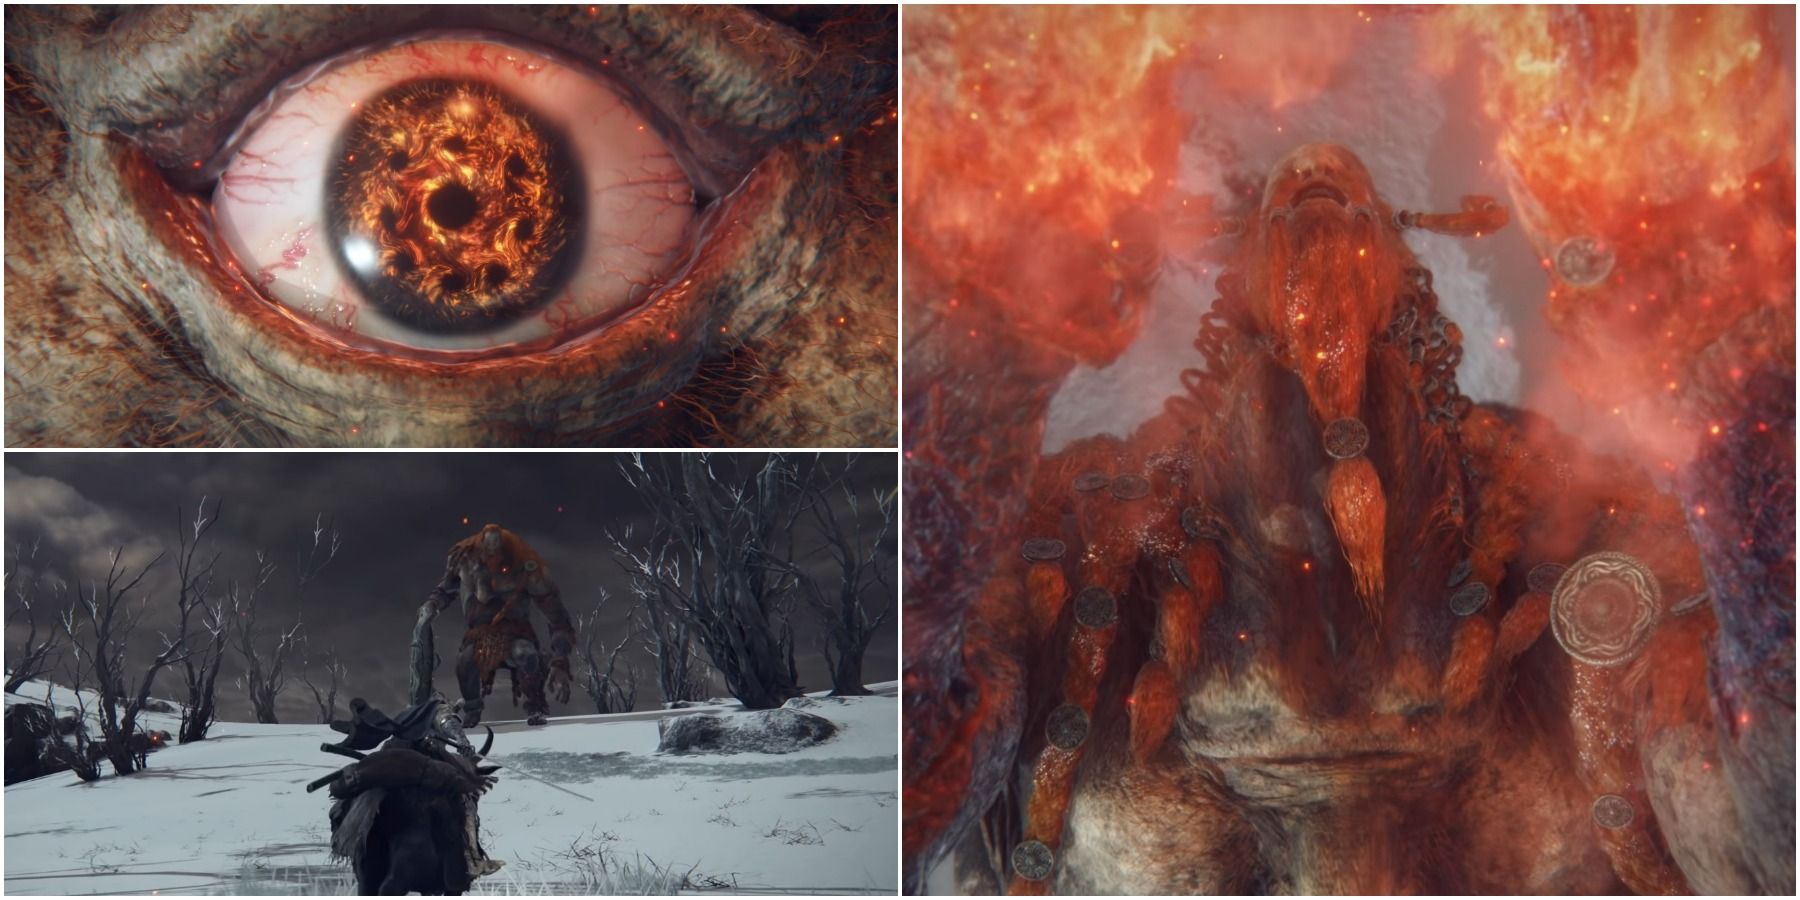 Fire Giant Eye Opening, Fire Giant Praying, Tarnished Riding Towards Fire Giant